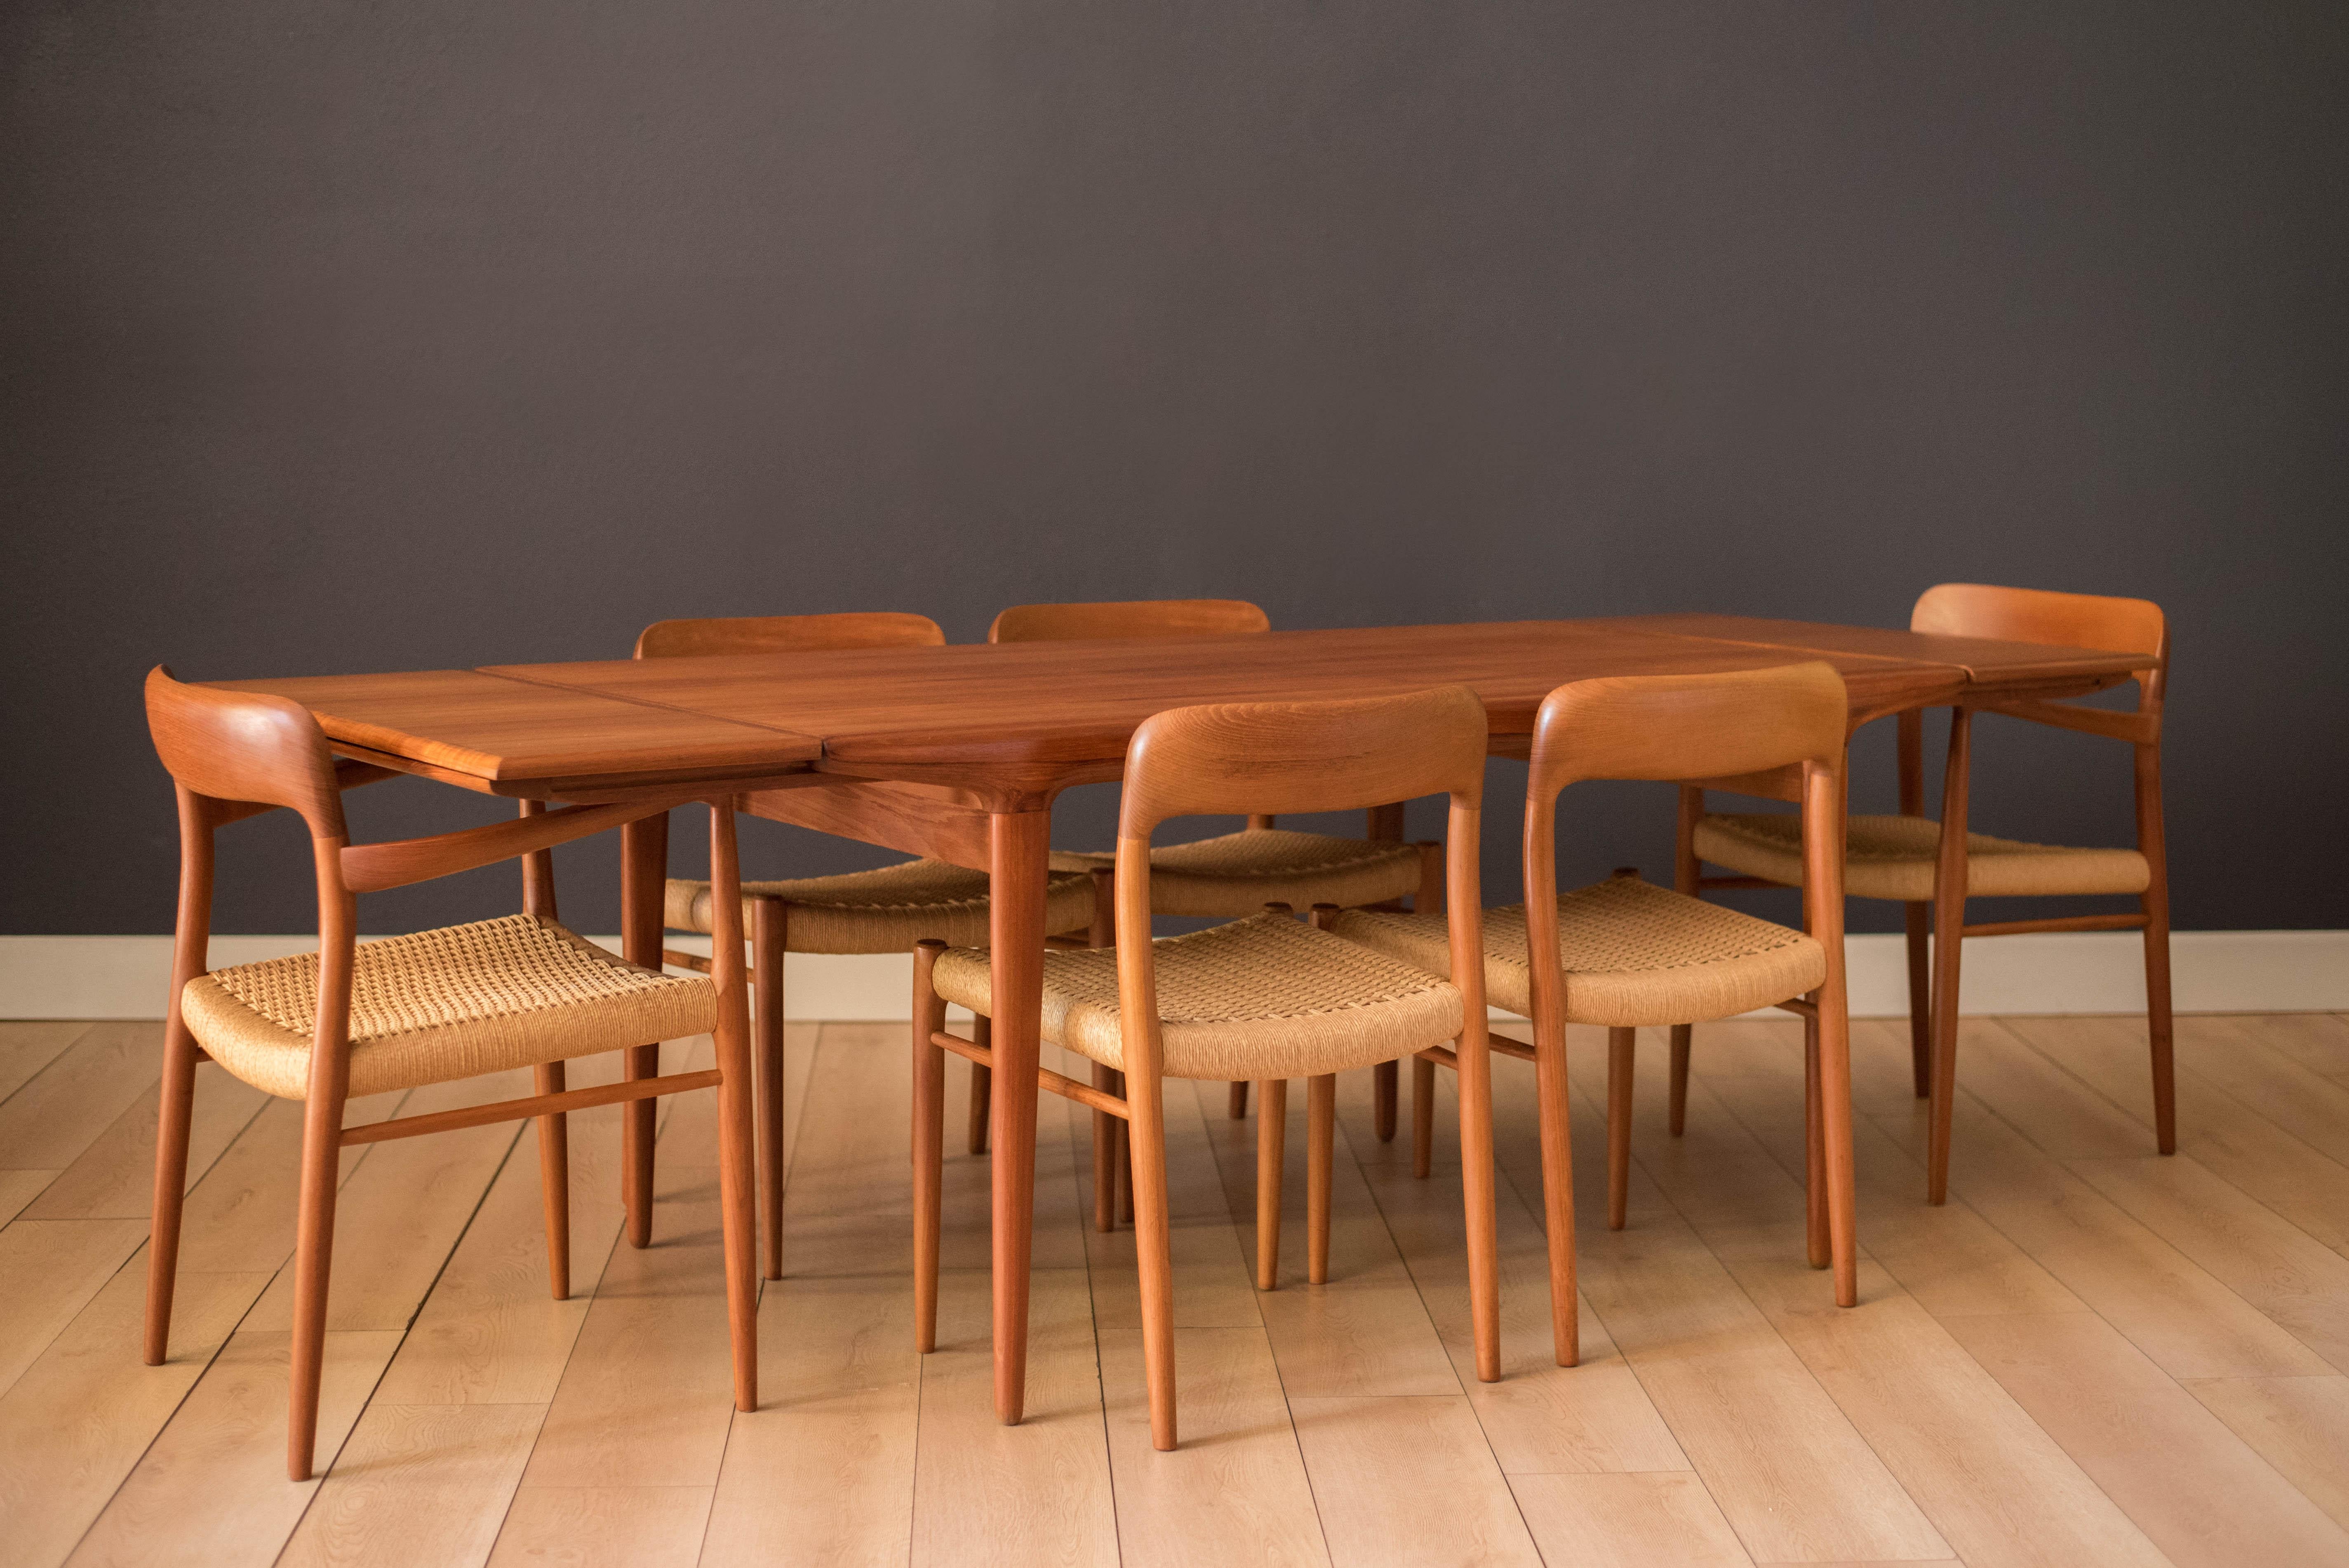 Midcentury expandable dining table in teak designed by Niels O. Moller for J.L. Mobelfabrik, Denmark. This versatile piece includes two pocket leaf extensions that cleverly store underneath the table. Features smooth rounded edges and slightly